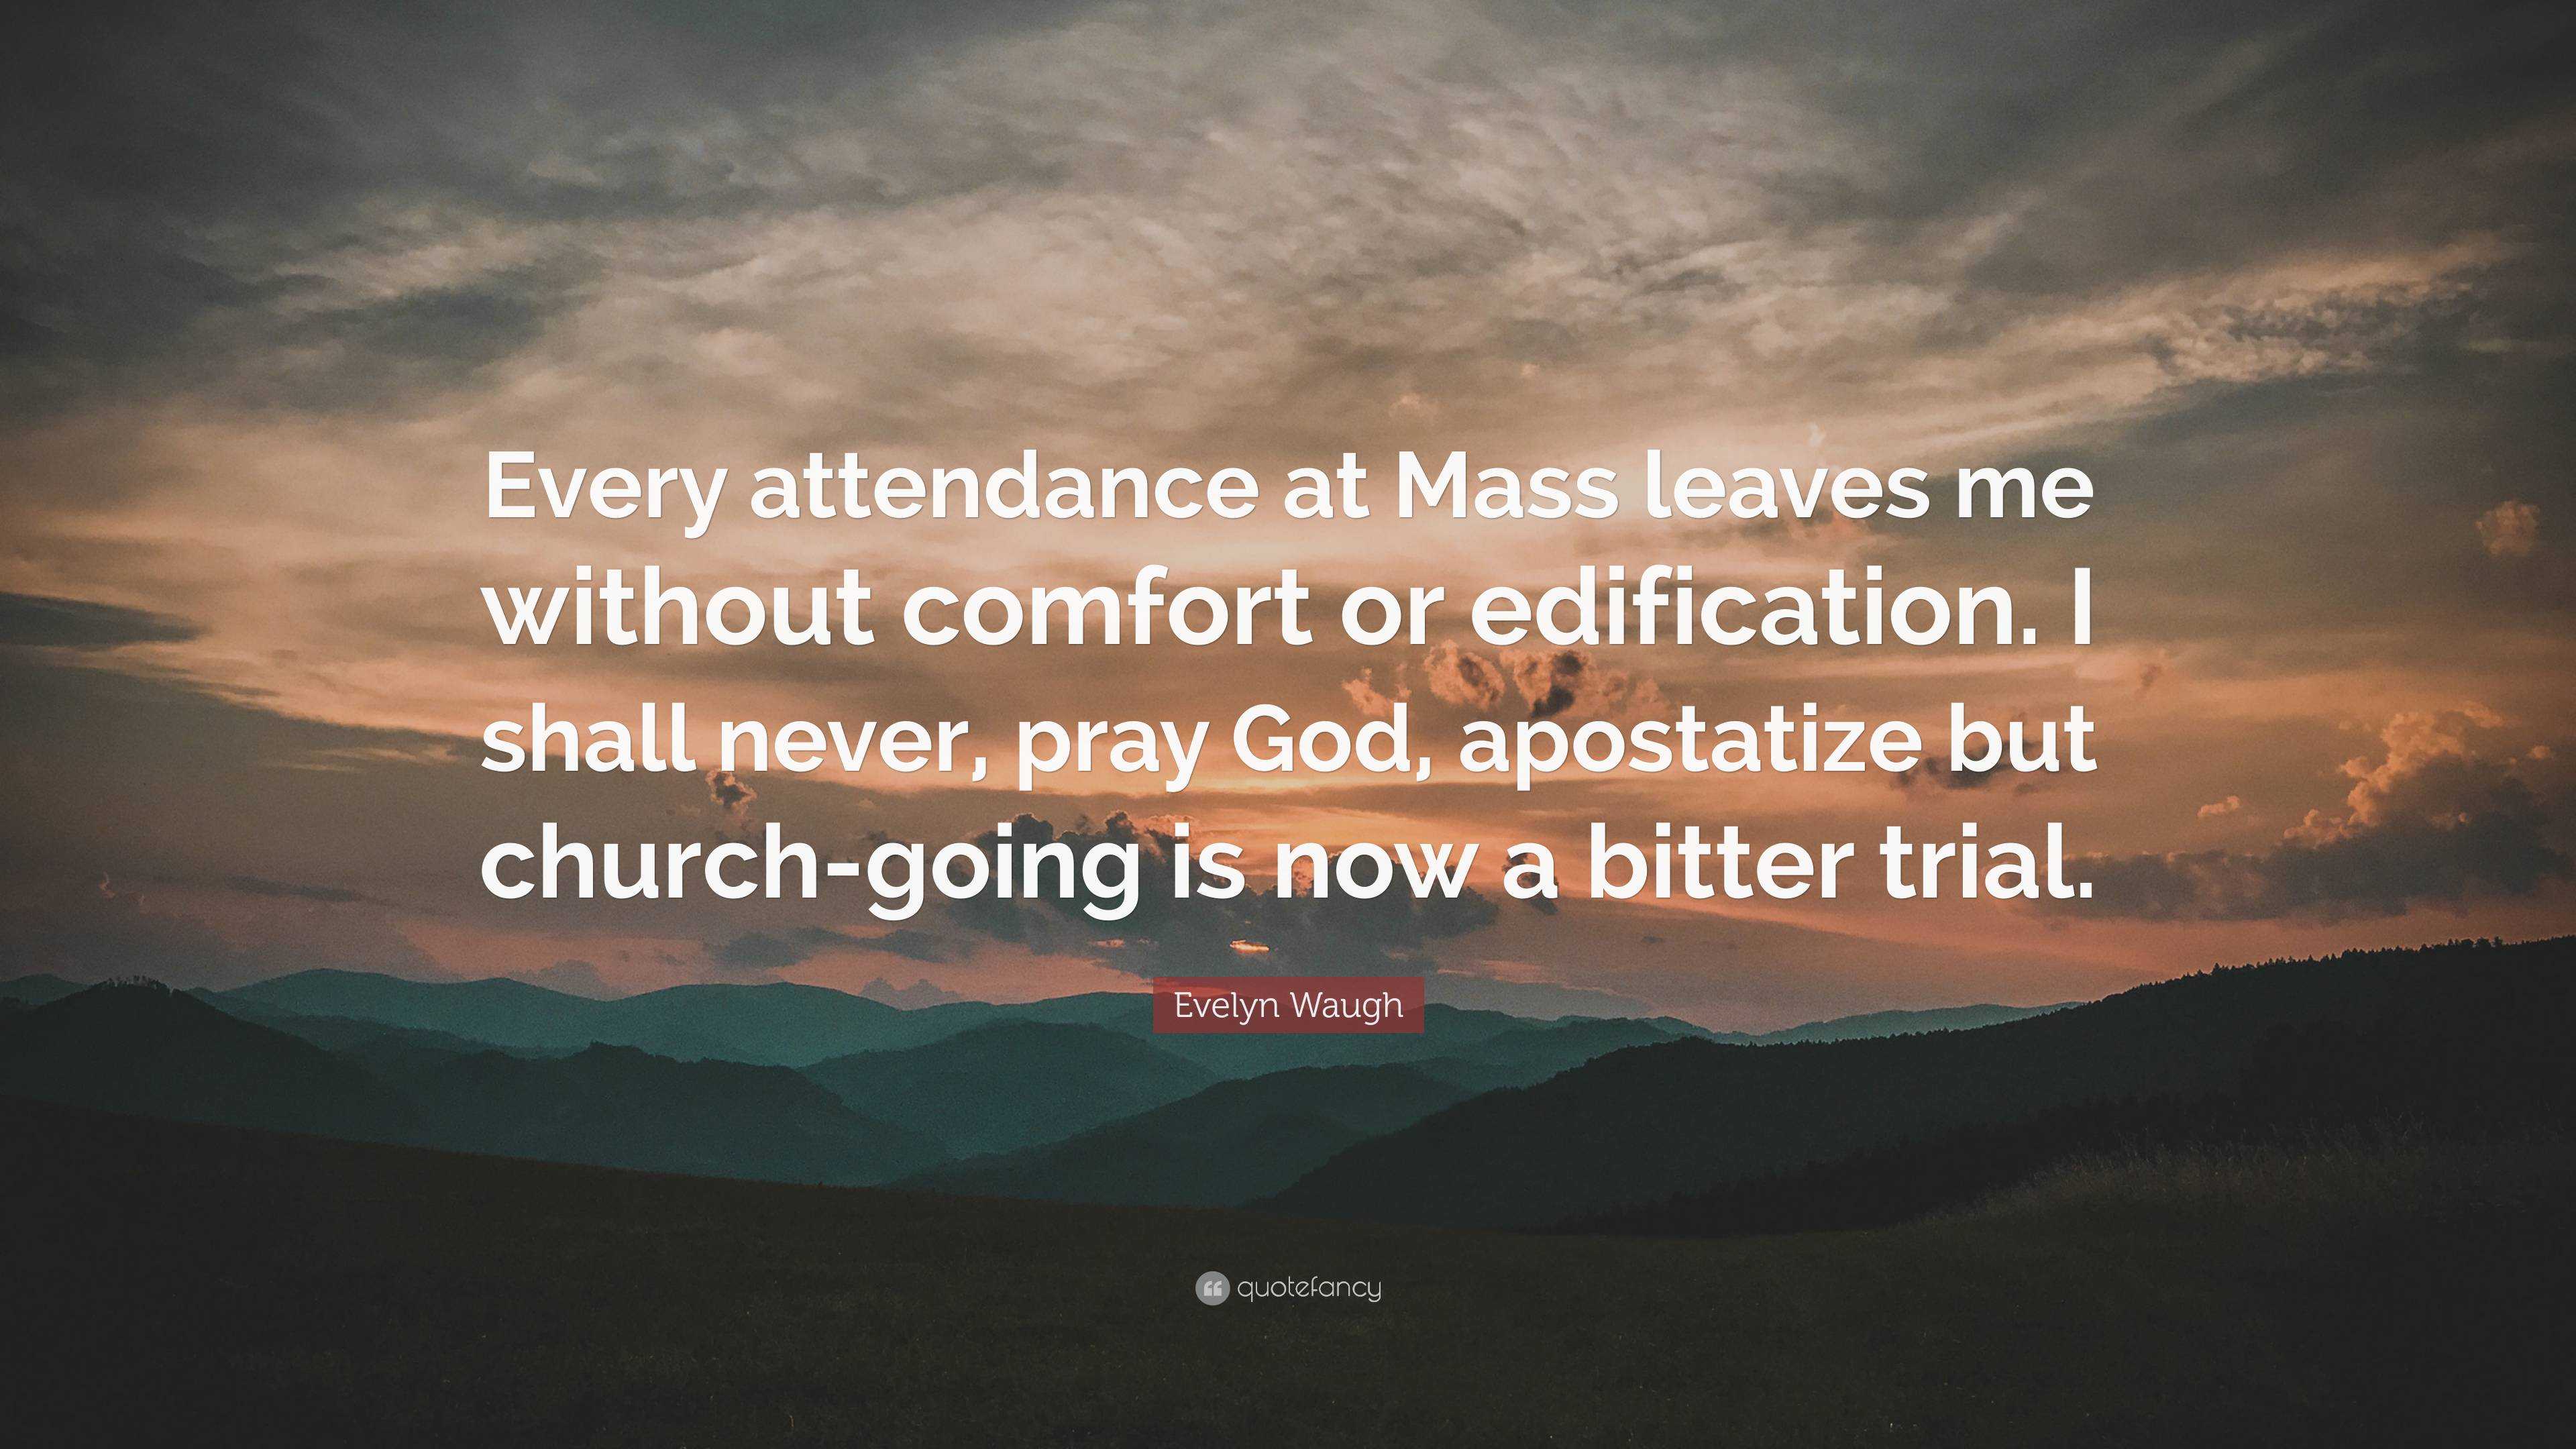 Evelyn Waugh Quote: “Every attendance at Mass leaves me without comfort ...